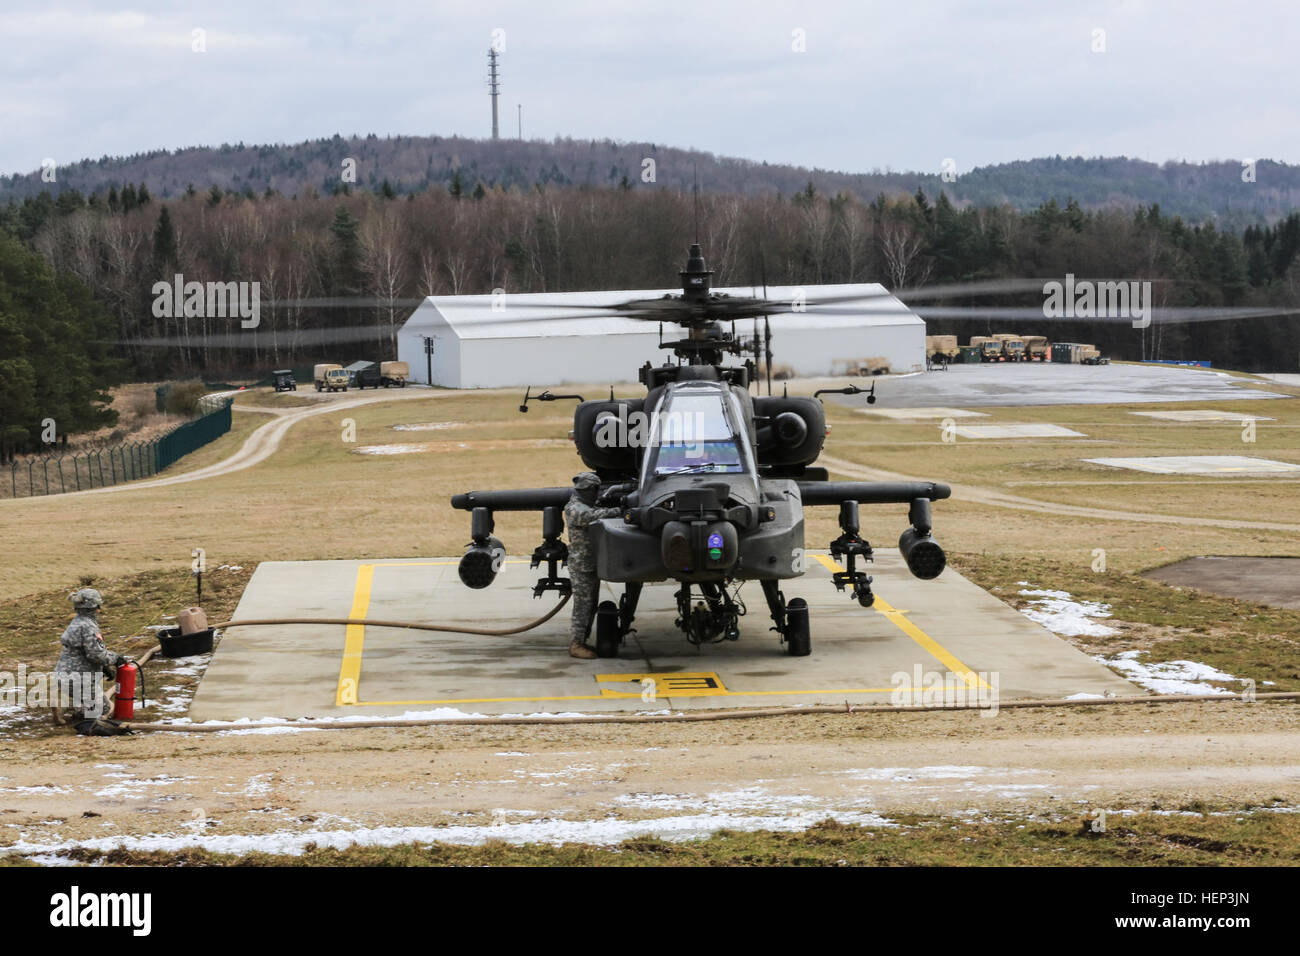 U.S. Soldiers of 2nd Battalion, 159th Aviation Regiment, 12th Combat Aviation Brigade conduct forward arming and refueling point operations with an AH-64D Apache Longbow helicopter during exercise Allied Spirit at the Joint Multinational Readiness Center in Hohenfels, Germany, Jan. 25, 2015. Exercise Allied Spirit includes more than 2,000 participants from Canada, Hungary, Netherlands, United Kingdom, and the U.S. Allied Spirit is exercising tactical interoperability and testing secure communications within alliance members. (U.S. Army photo by Spc. Justin De Hoyos/Released) Allied Spirit I 15 Stock Photo